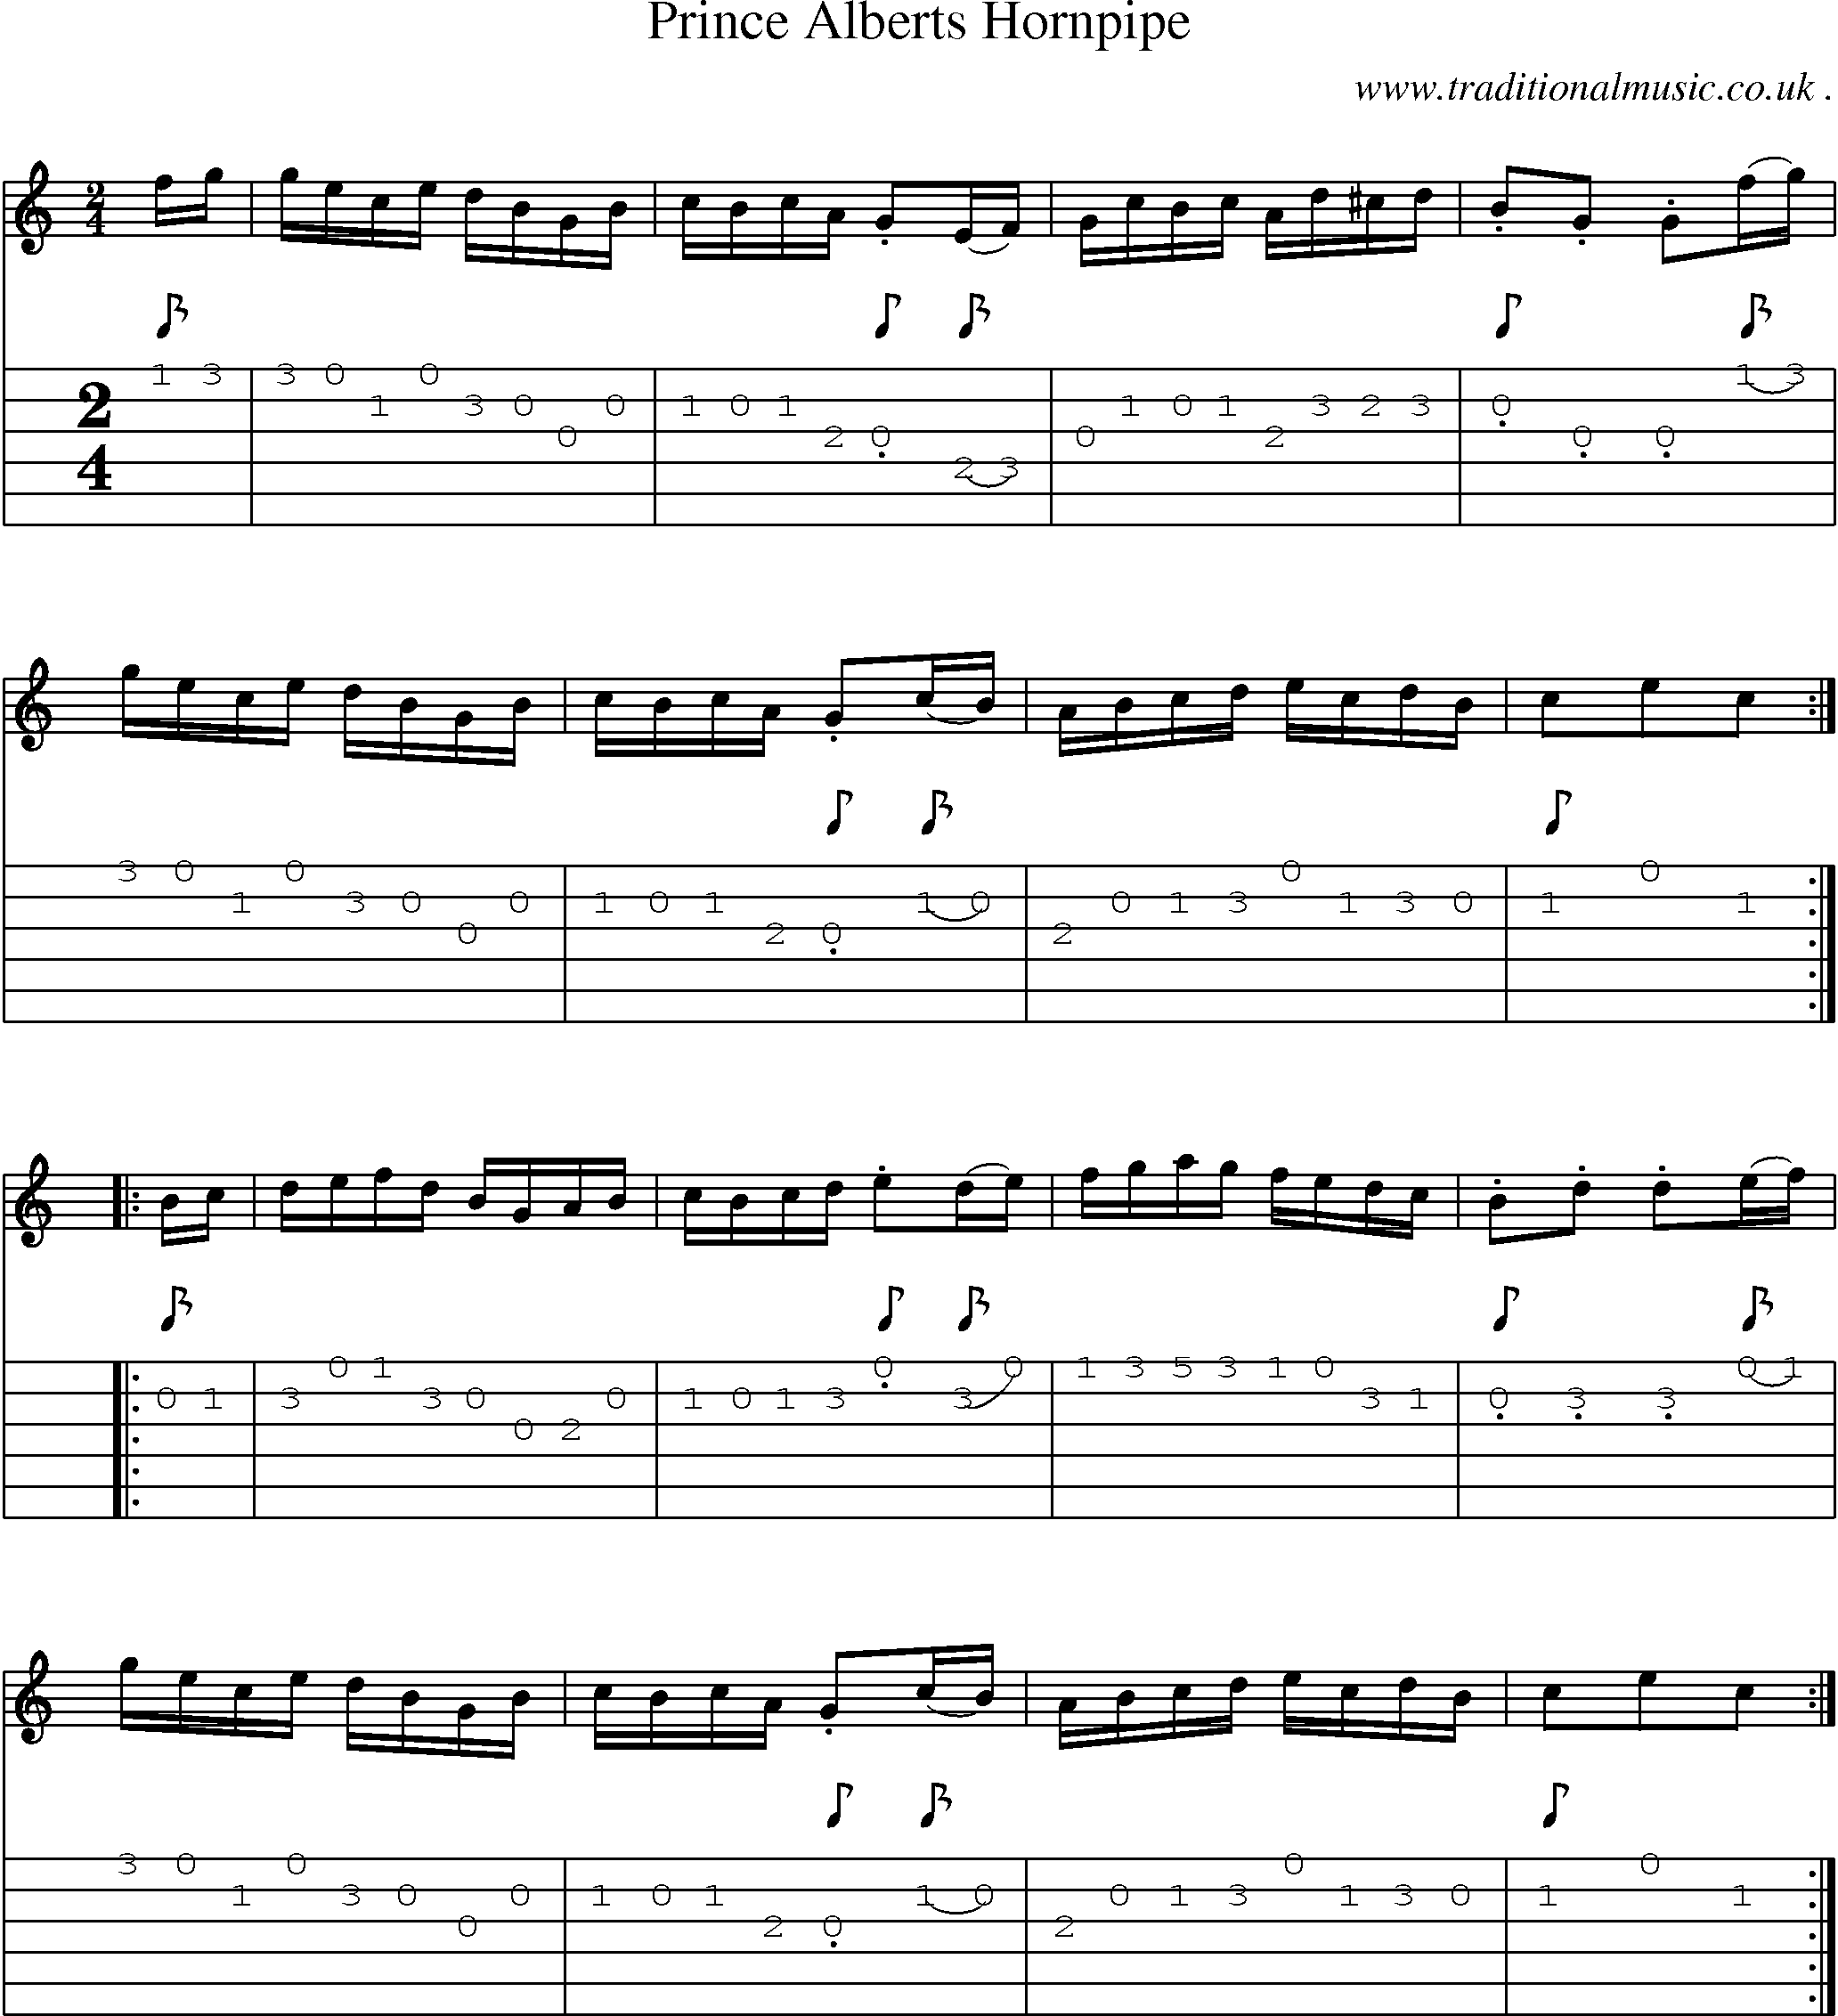 Sheet-Music and Guitar Tabs for Prince Alberts Hornpipe